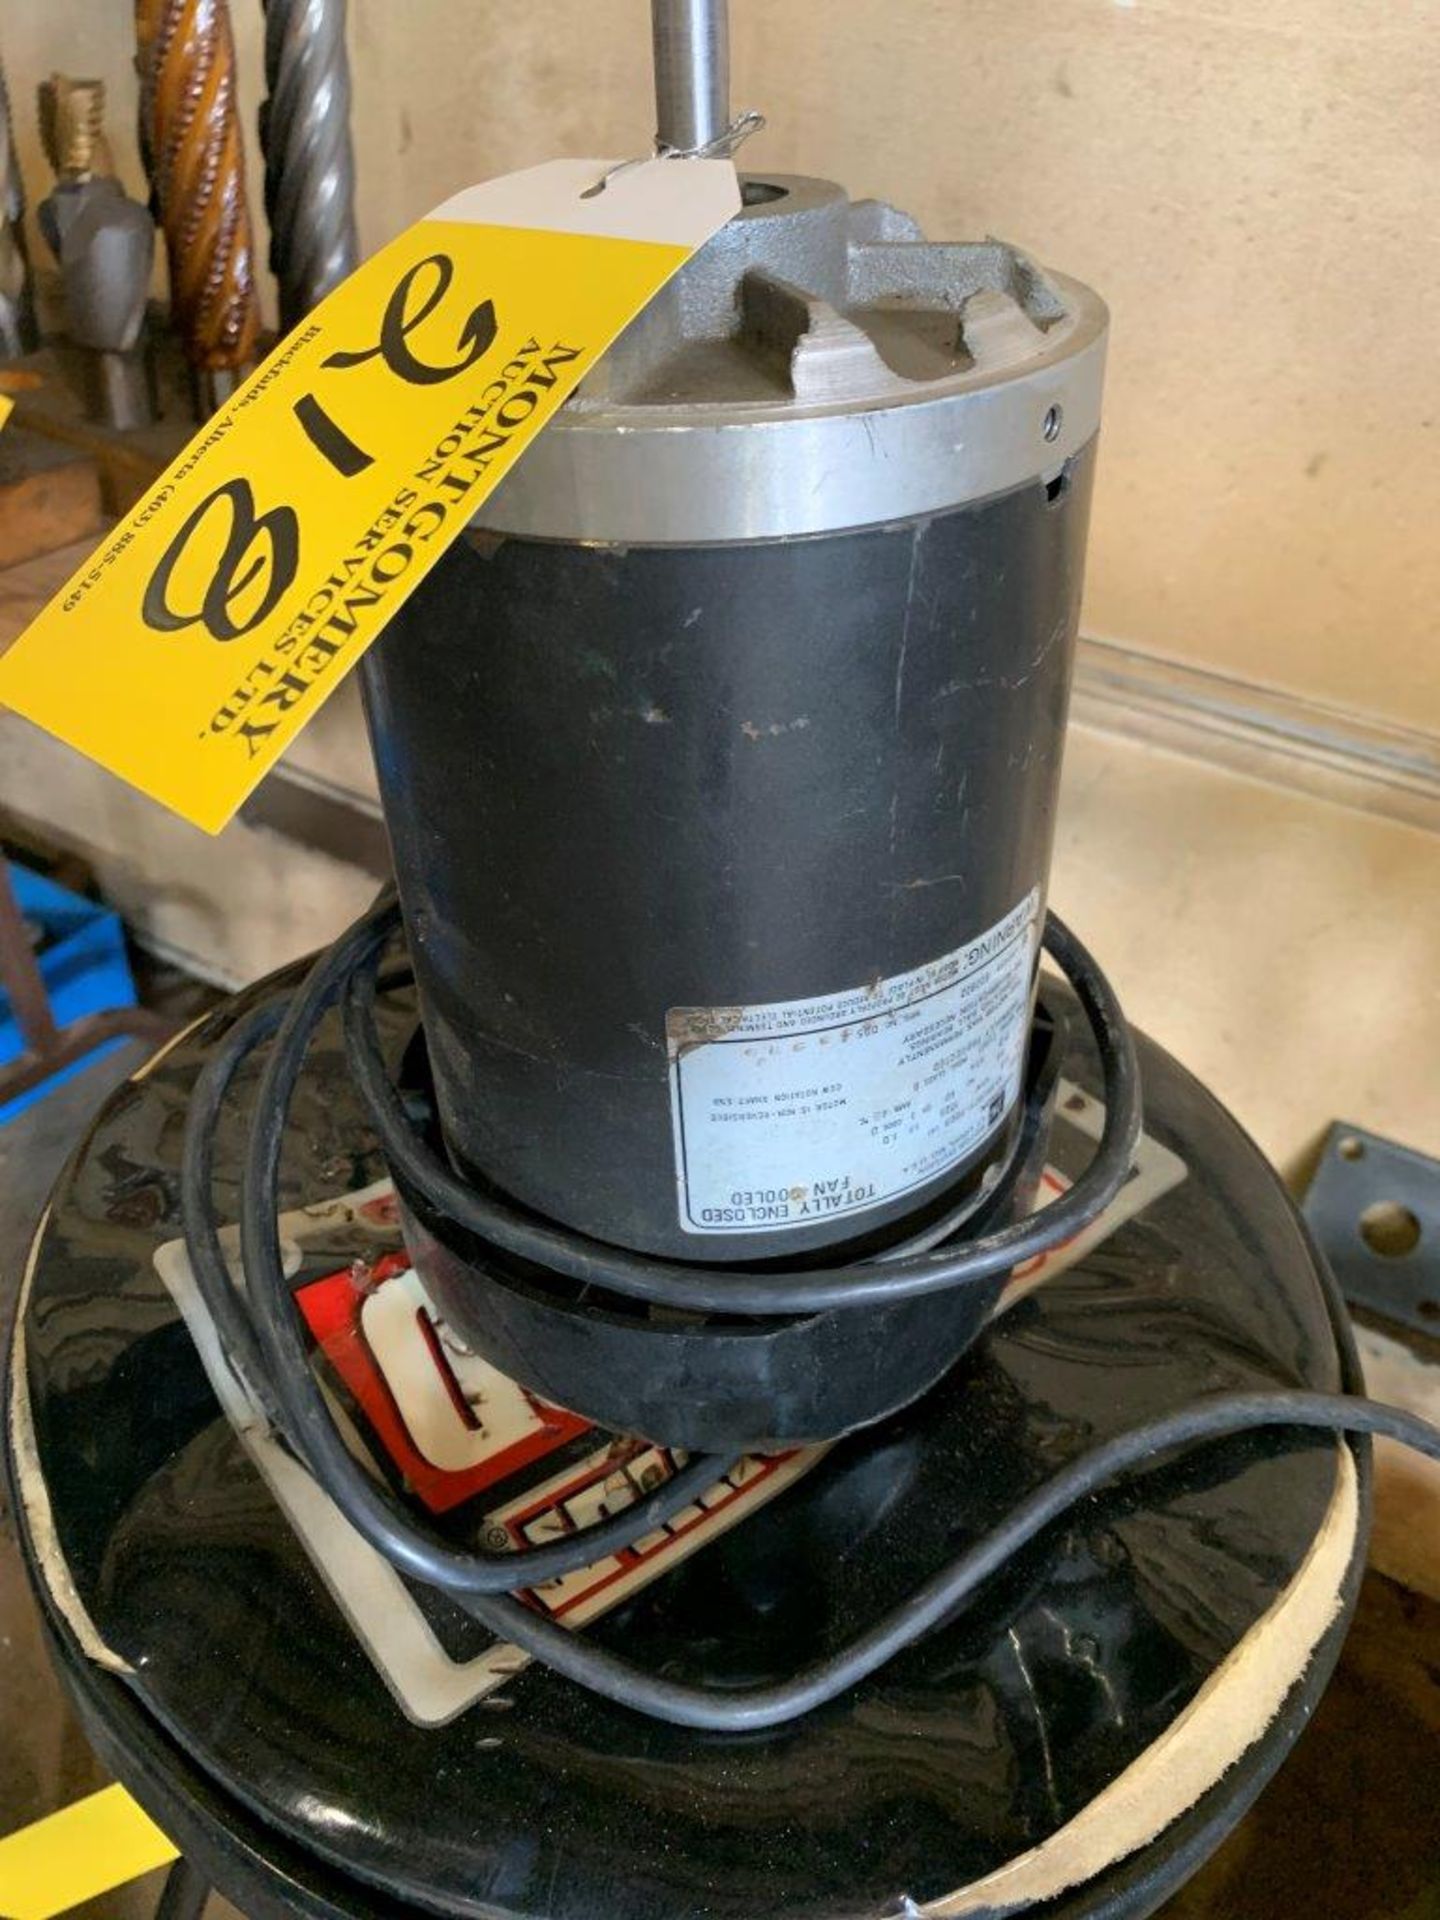 MIERSON 1/2 HP SP ELECTRIC MOTOR, FAN COOLED